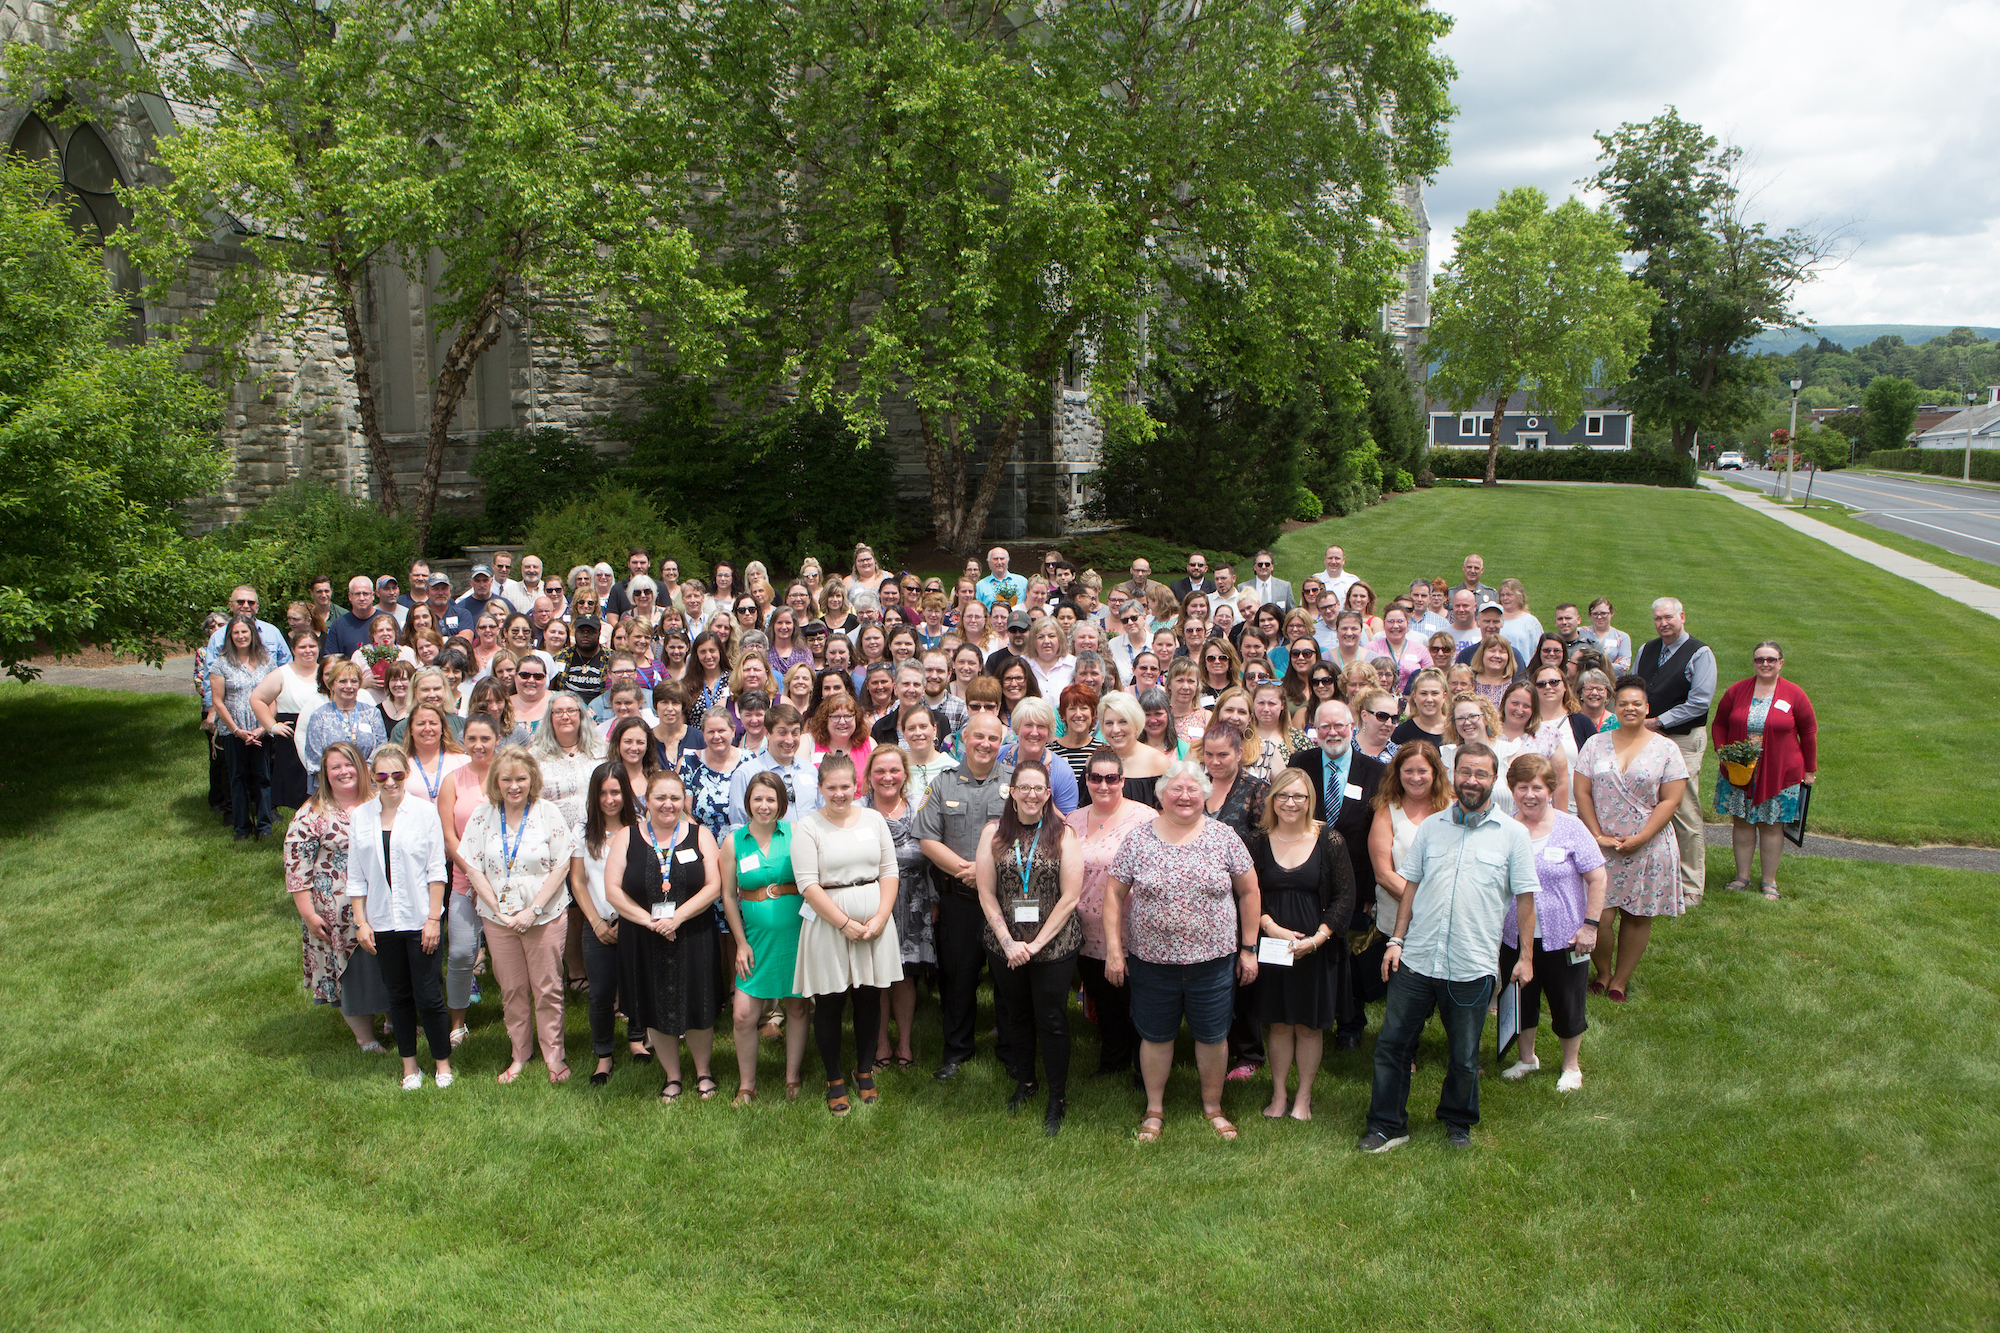 A very large group of people pose for a picture on a green lawn. There are trees in the background and Main Street in Bennington, Vermont can be seen off to the side.